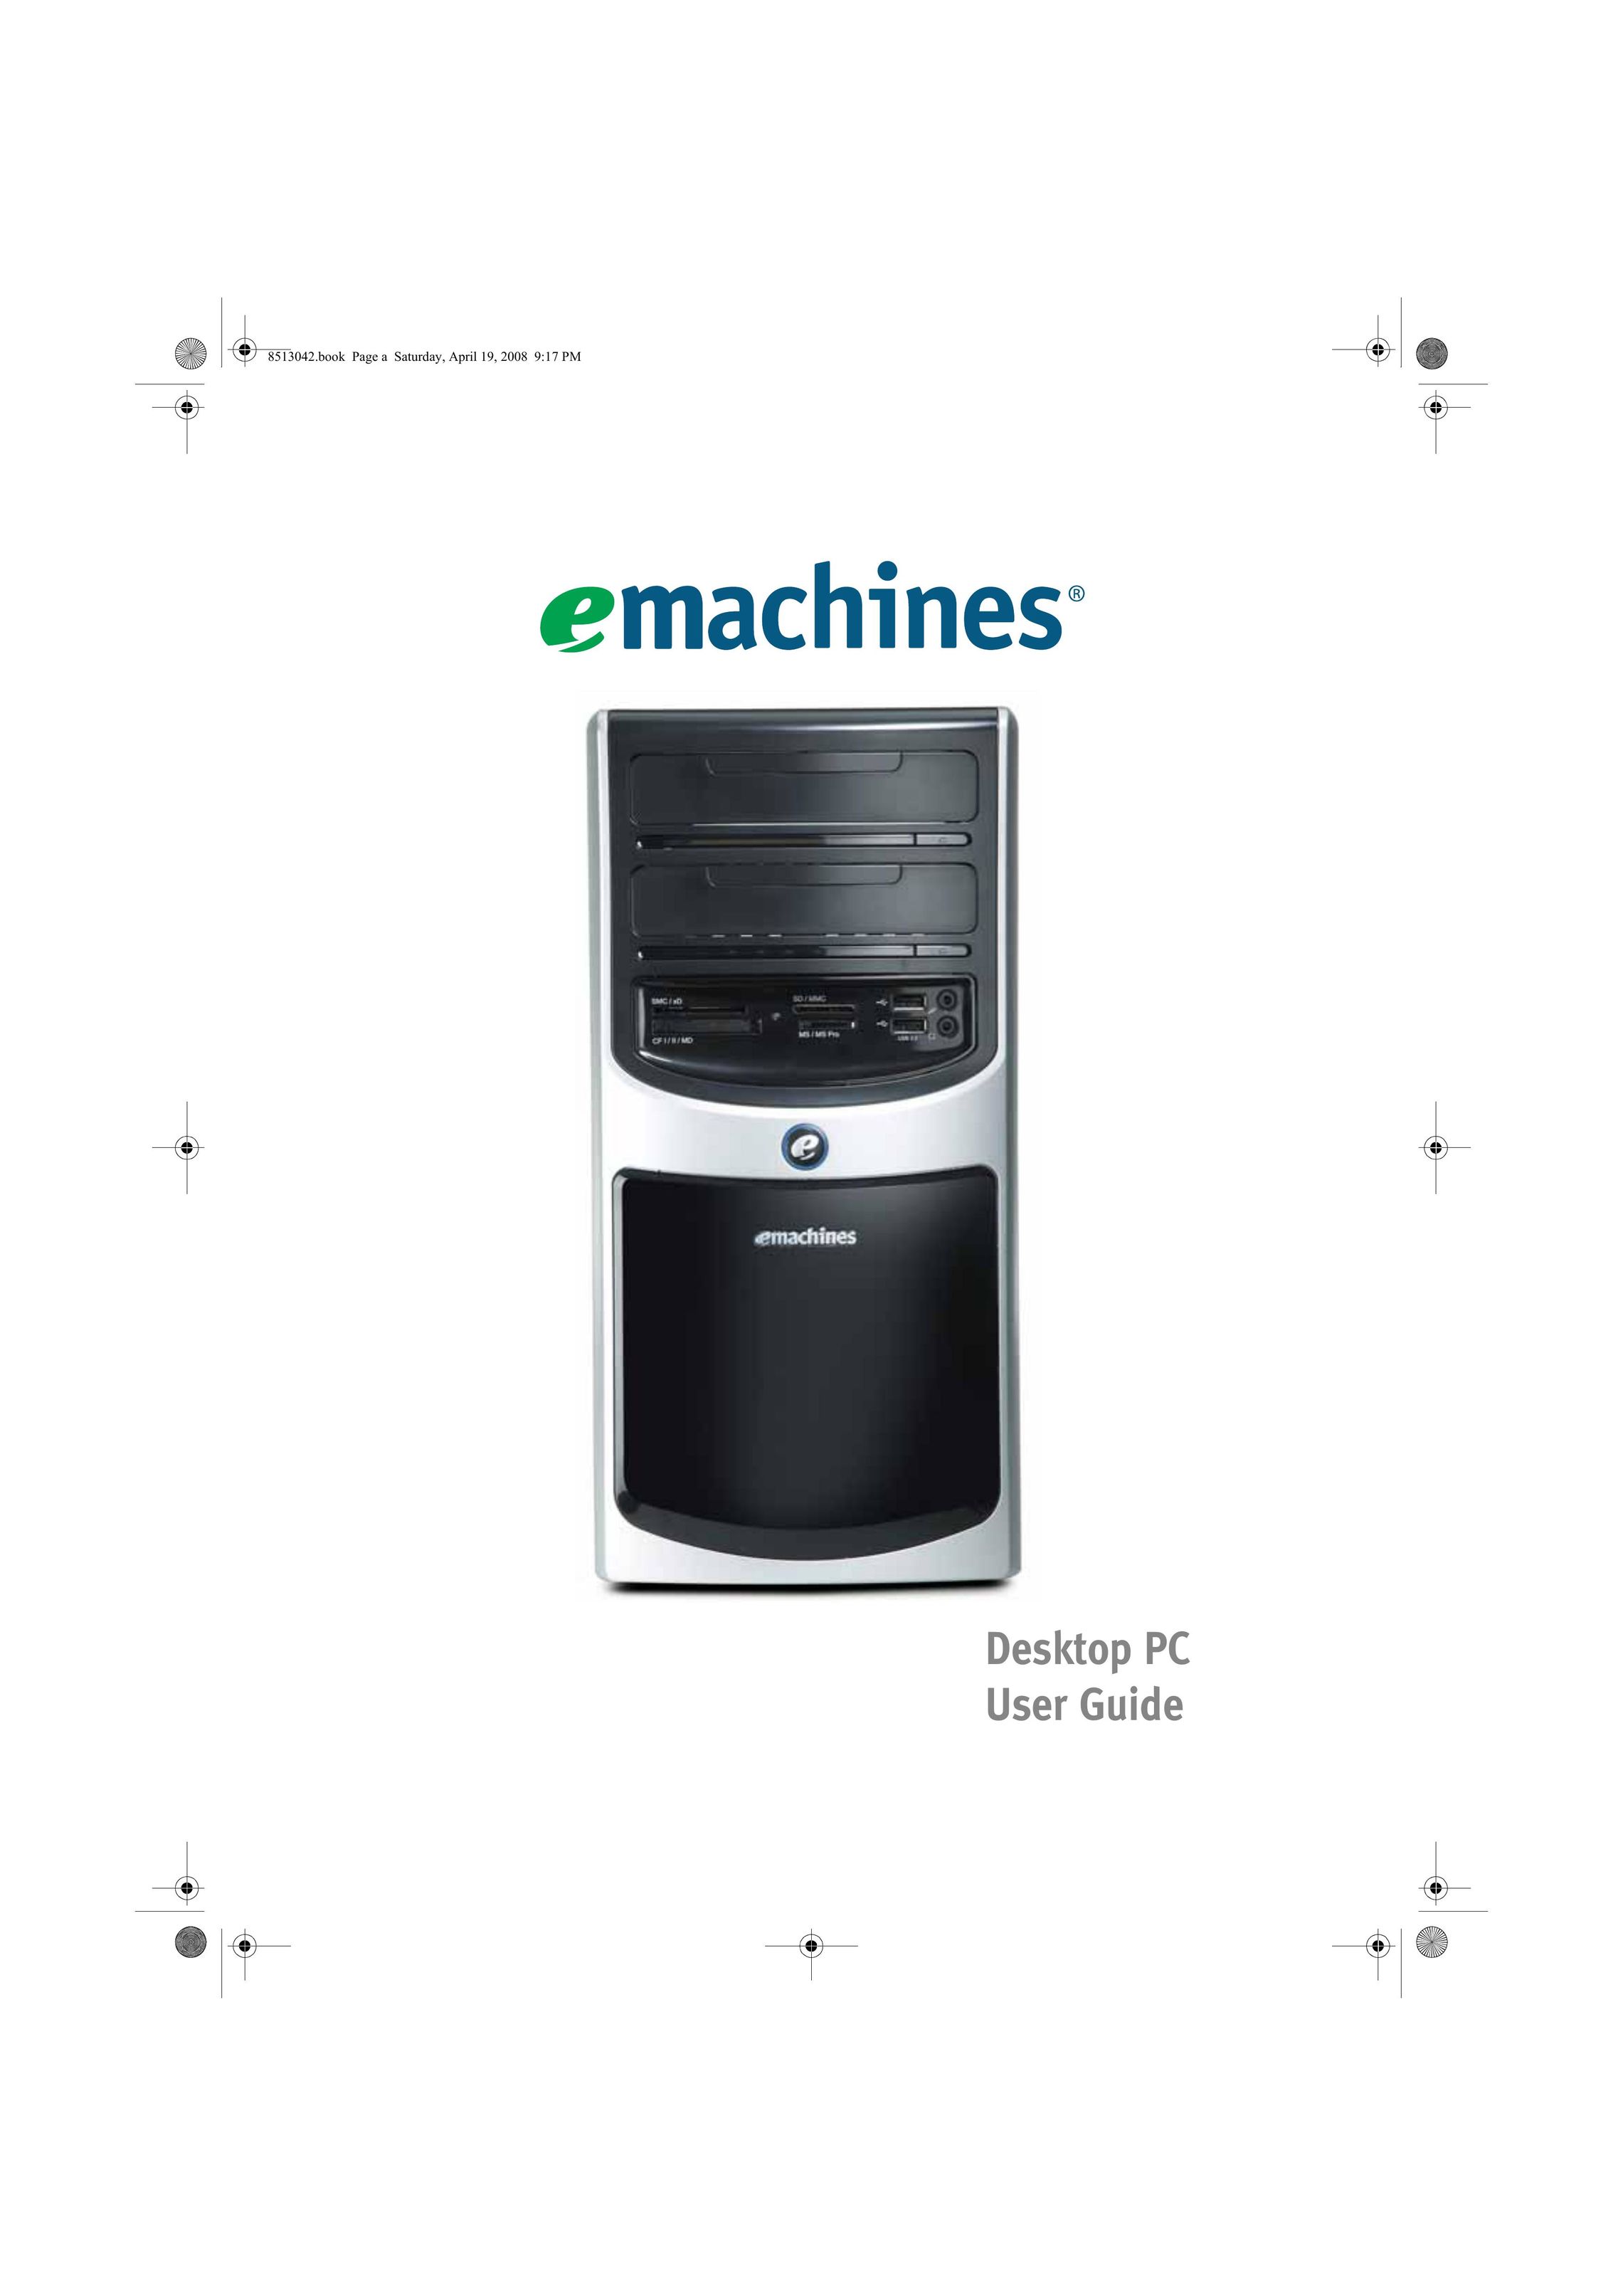 eMachines 8513042 Personal Computer User Manual